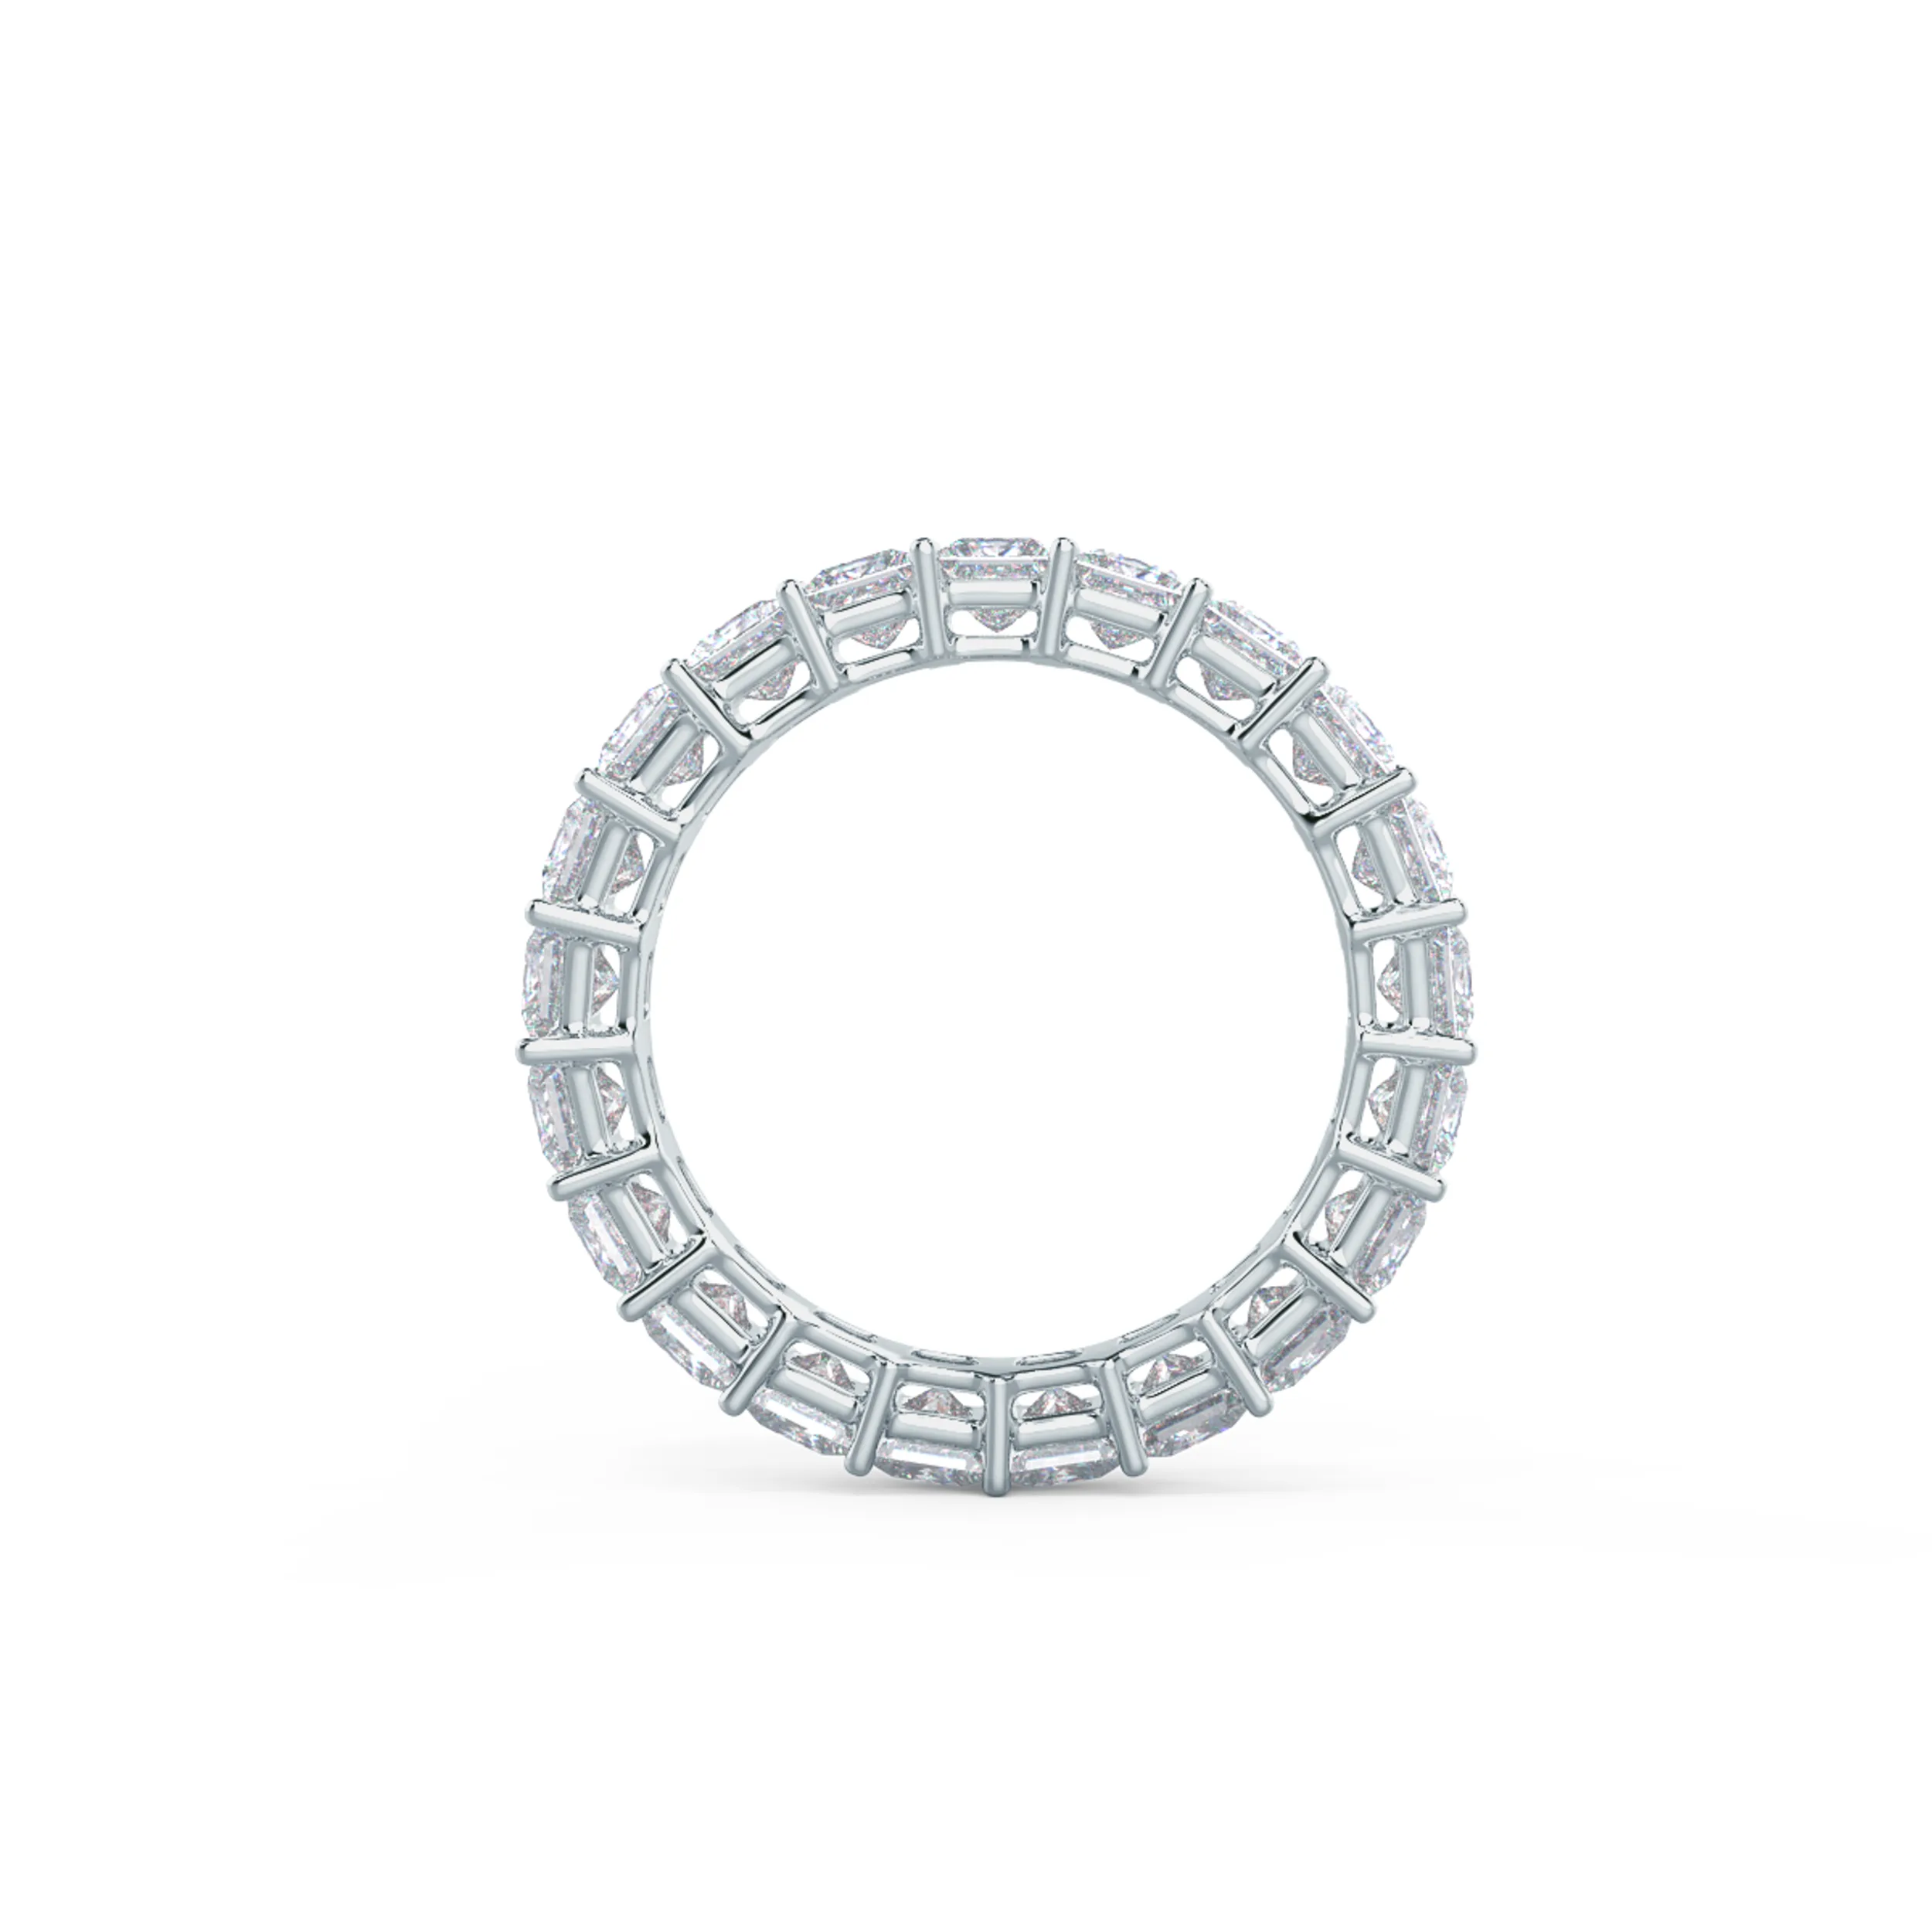 4.0 Carat Created Diamonds Princess Eternity Band in 18kt White Gold (Profile View)